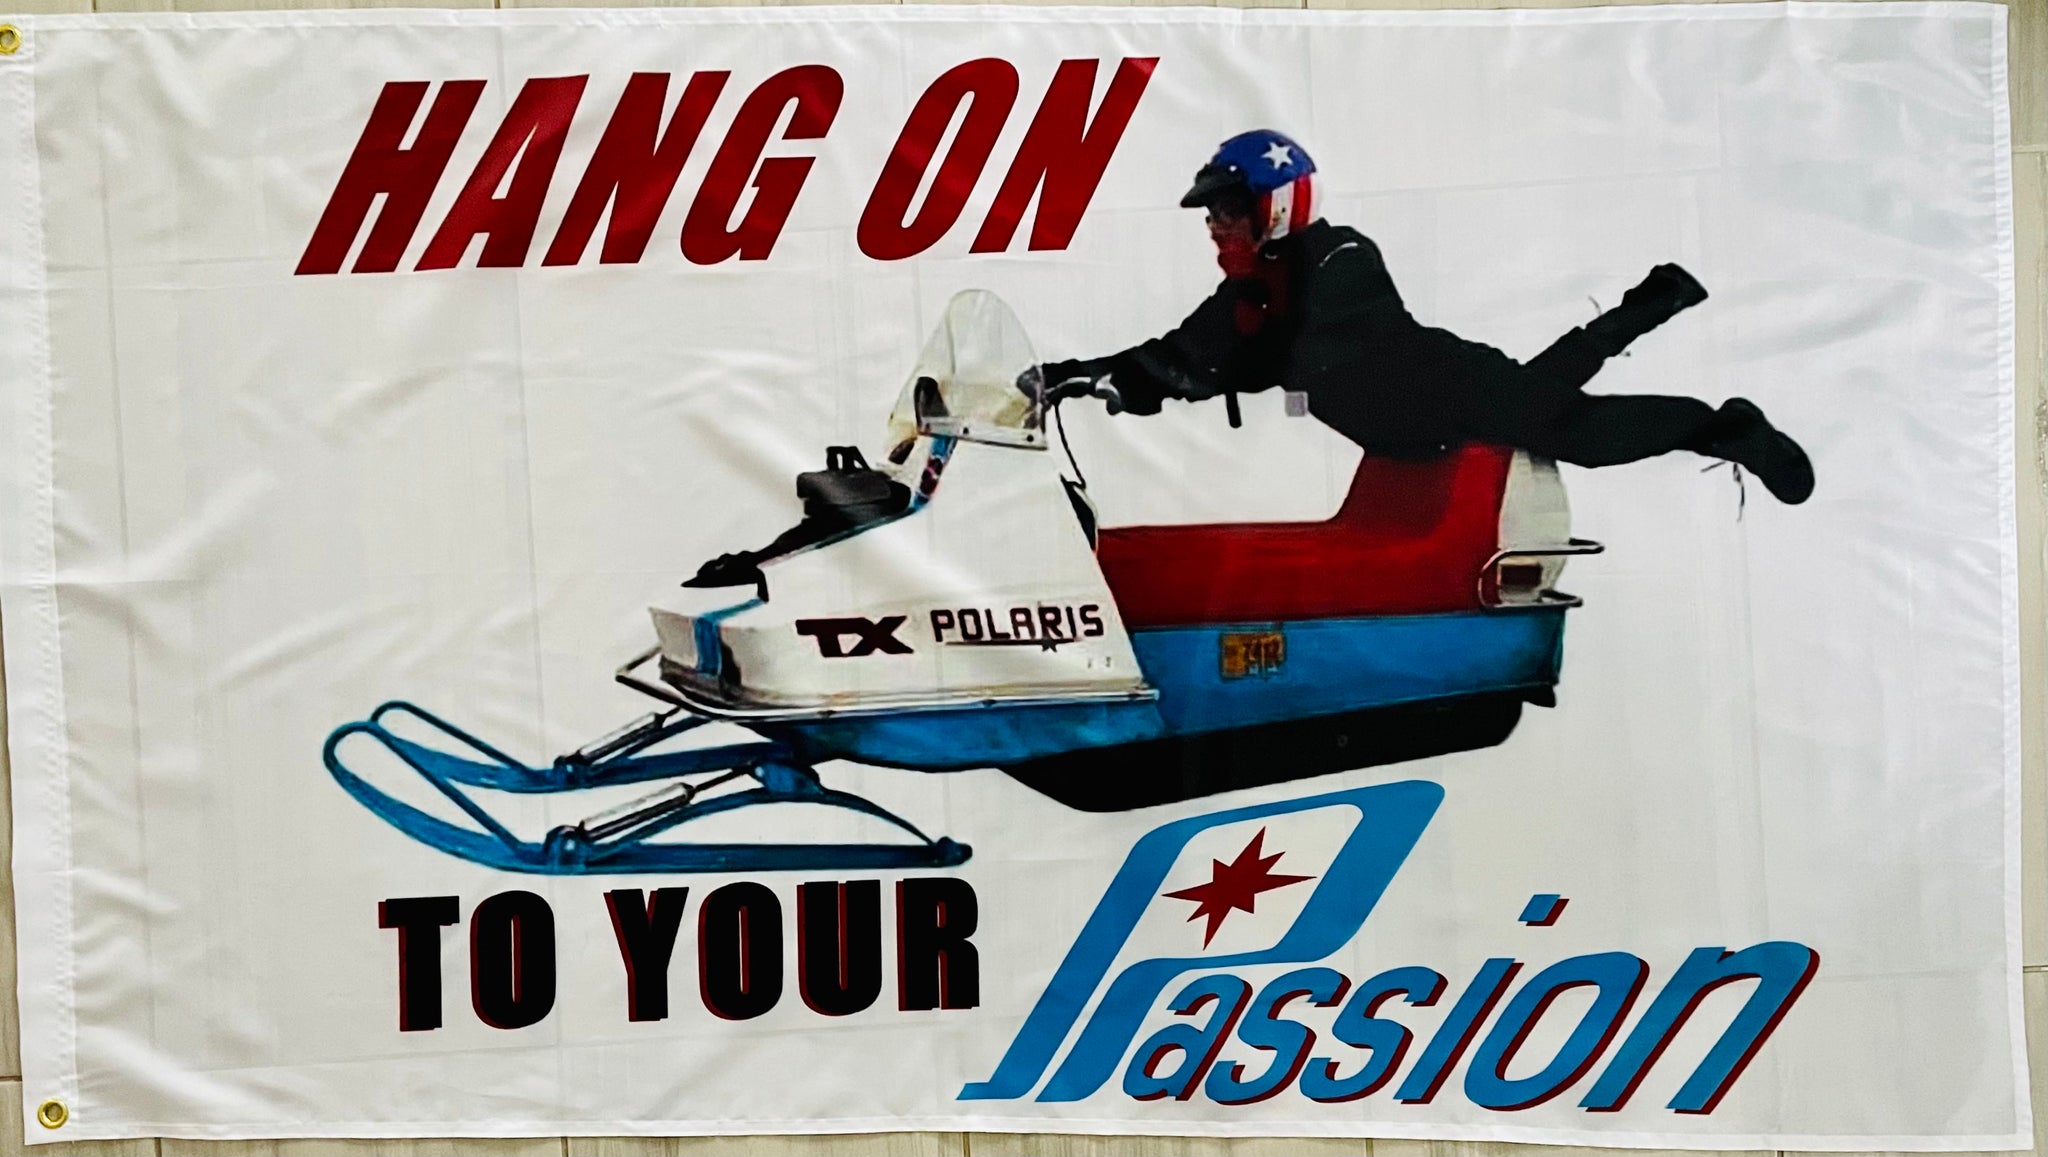 POLARIS SNOWMOBILES HANG ON TO YOUR PASSION 3X5FT FLAG BANNER MAN CAVE GARAGE